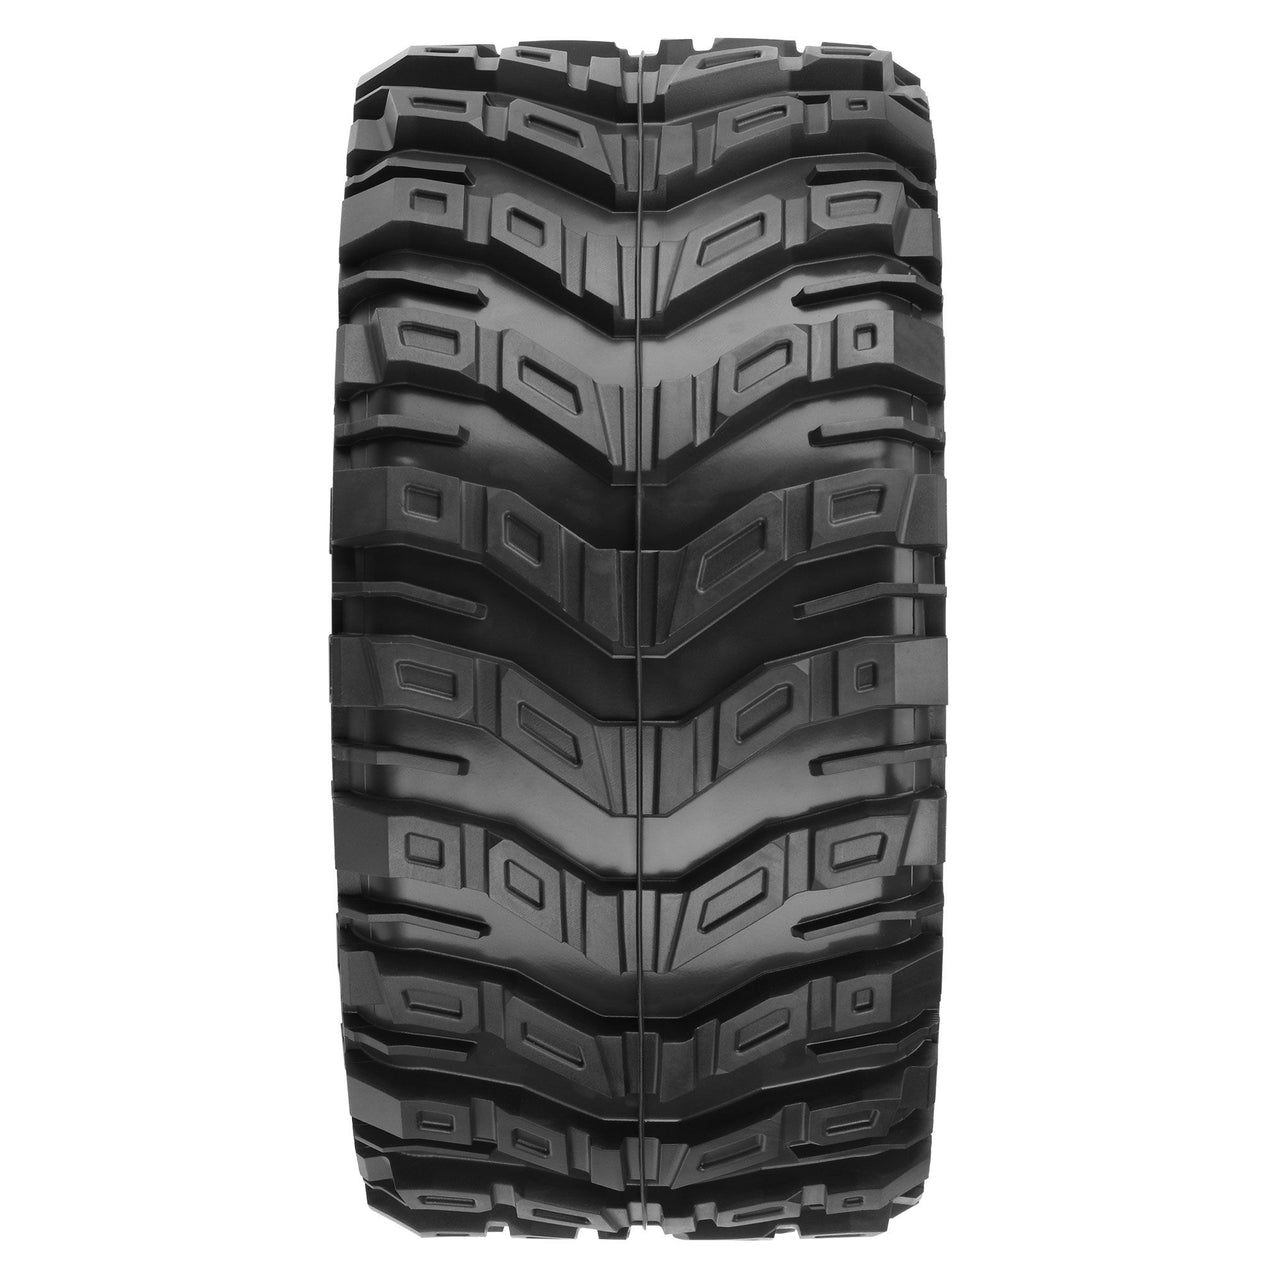 PRO1017611 1/6 Masher X HP BELTED Front/Rear 5.7” Tires Mounted on Raid 8x48 Removable 24mm Hex Wheels (2): Black